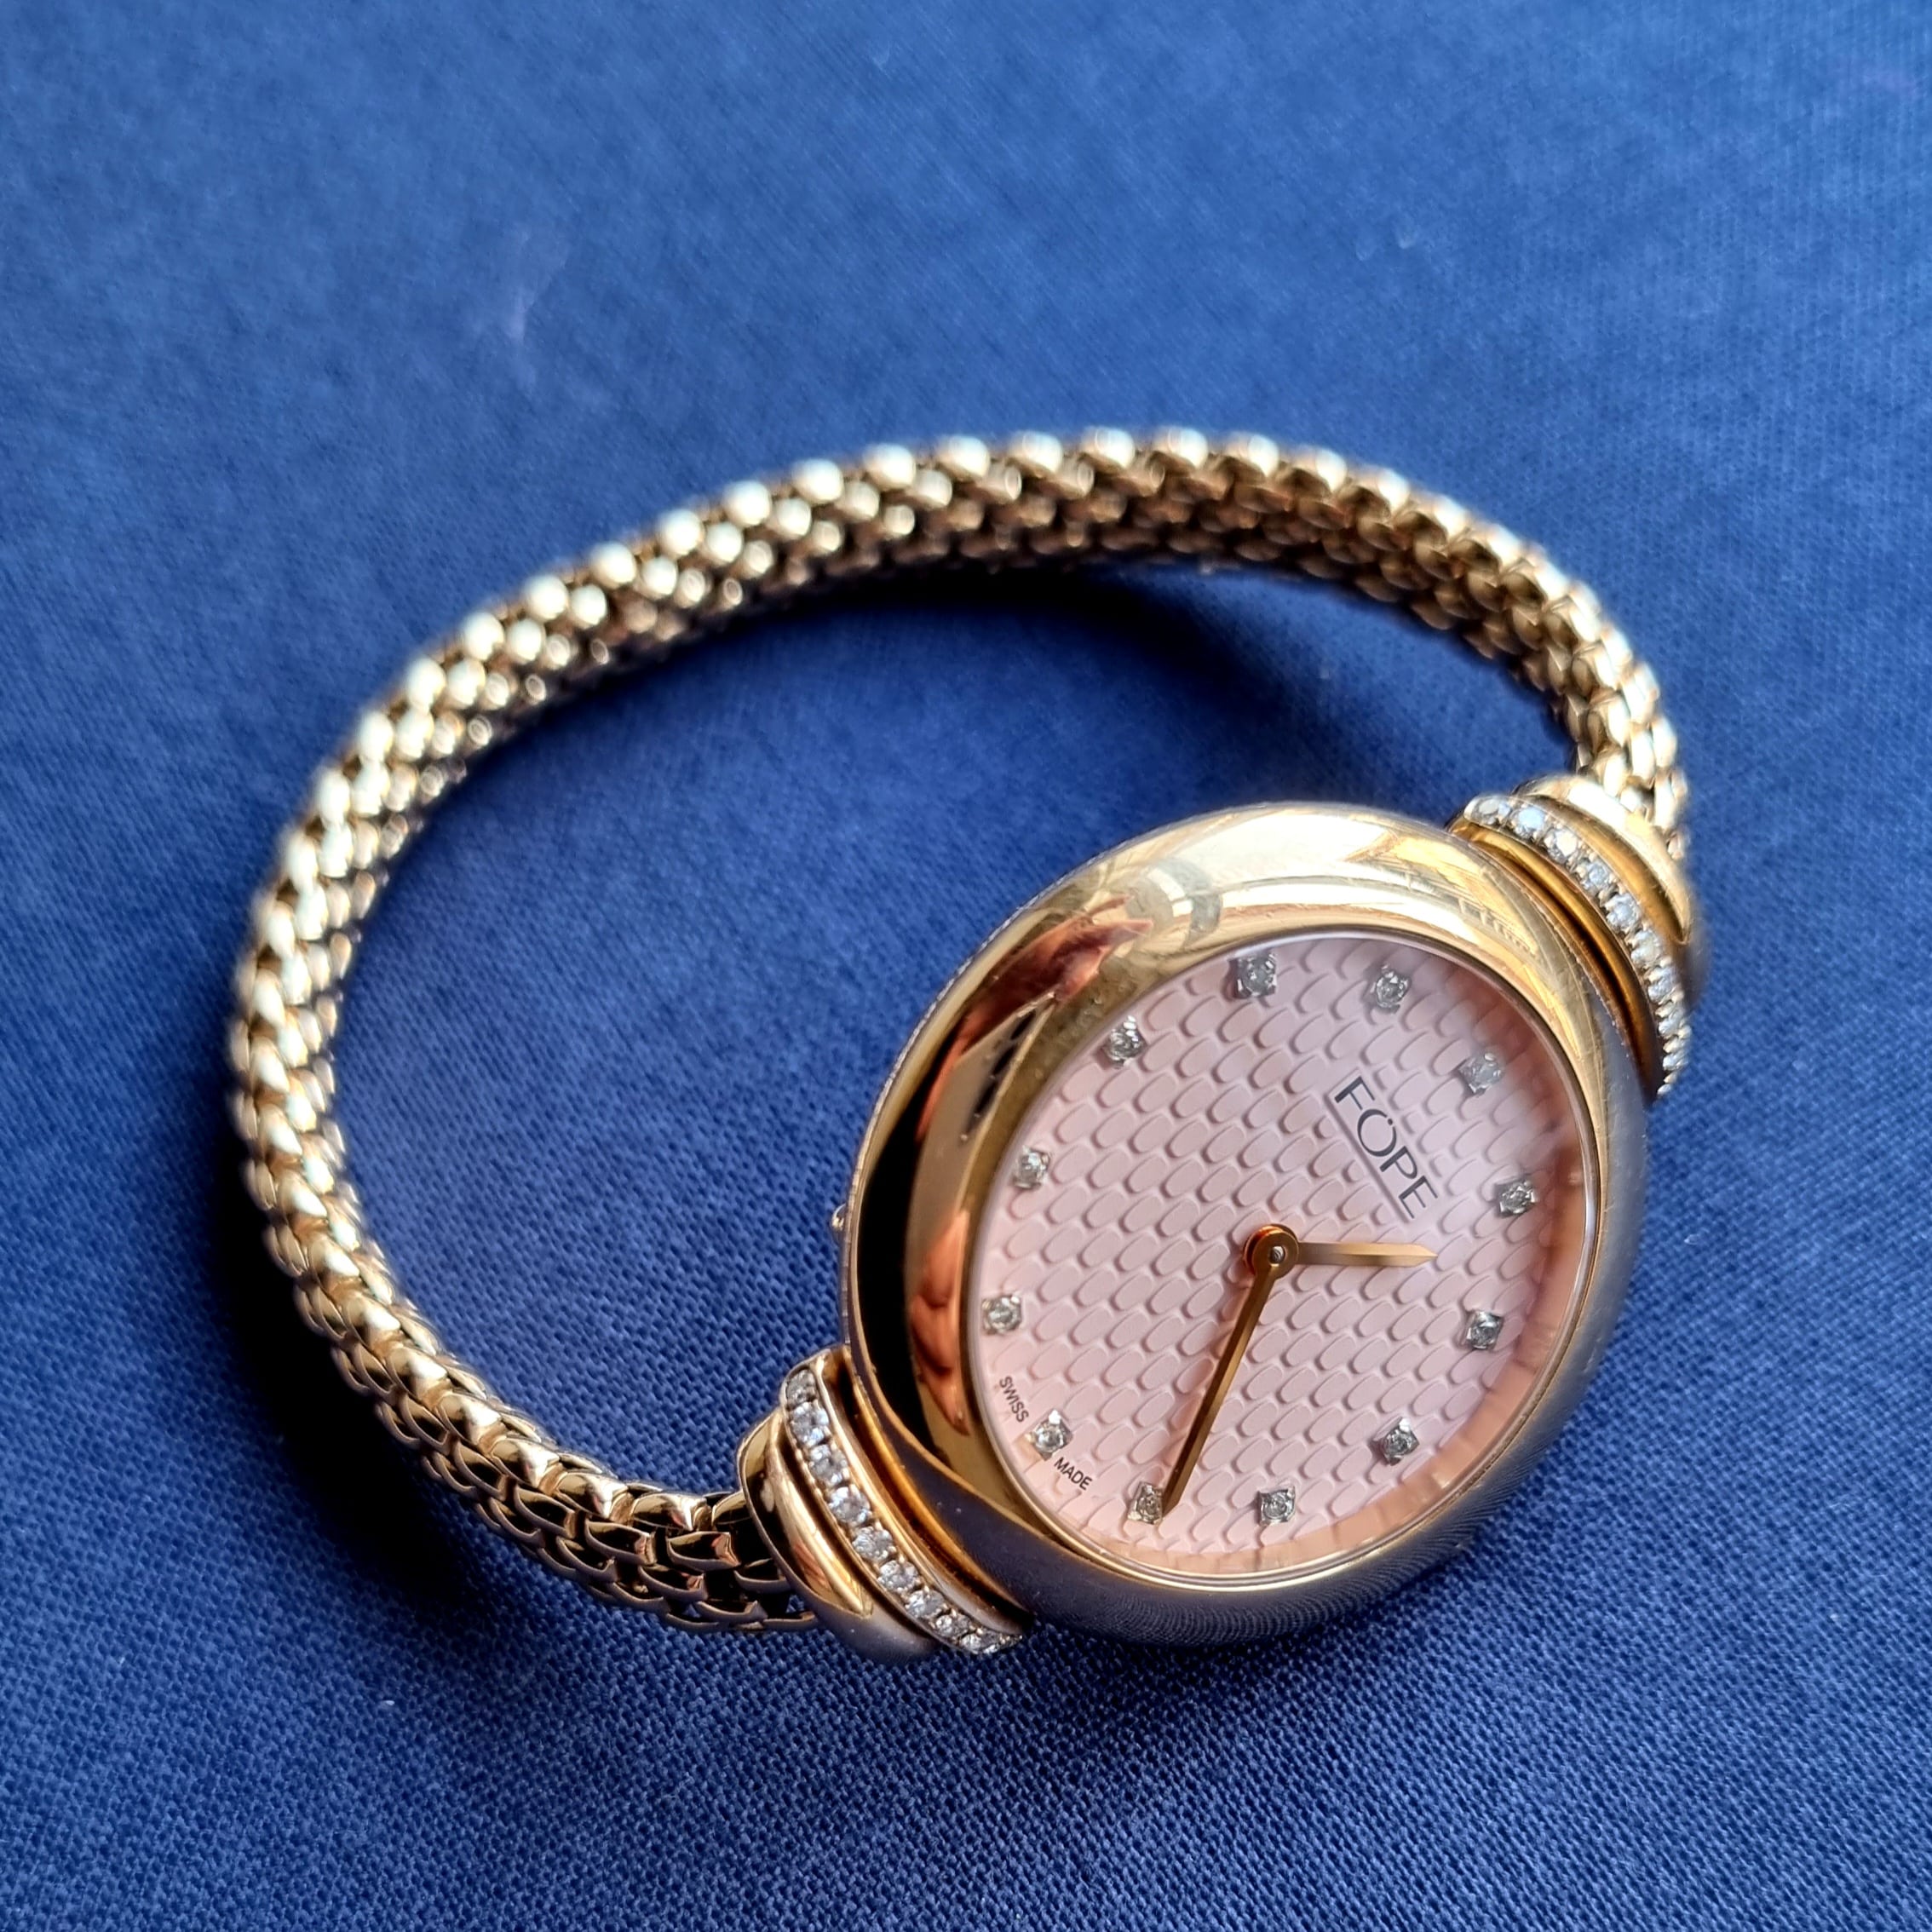 A Lady Fope Watch – 18ct Rose Gold